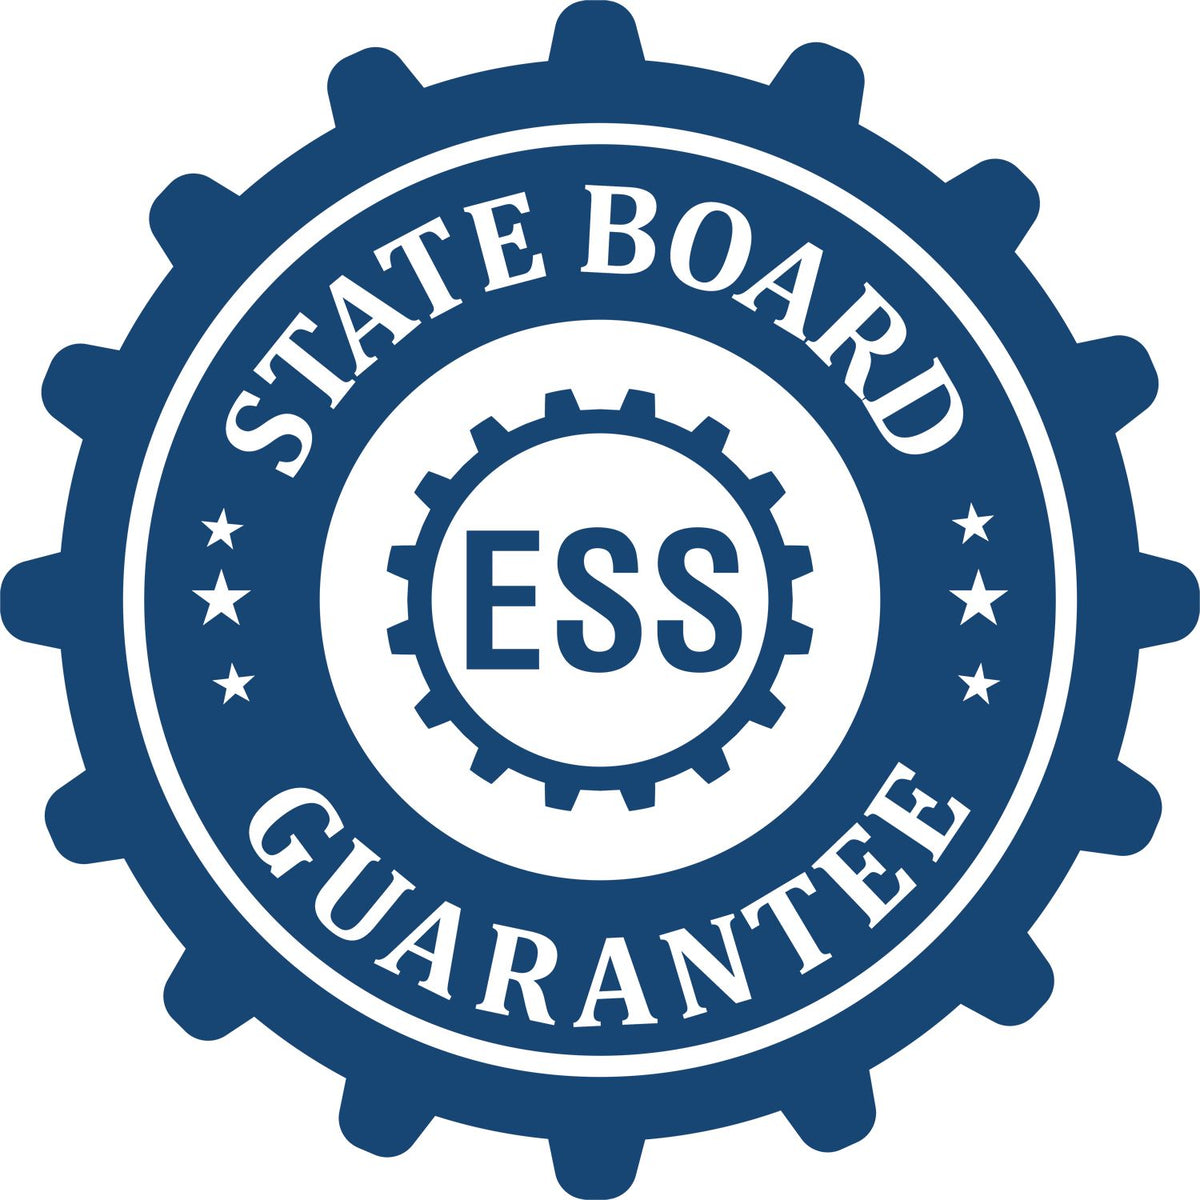 An emblem in a gear shape illustrating a state board guarantee for the Handheld Iowa Architect Seal Embosser product.